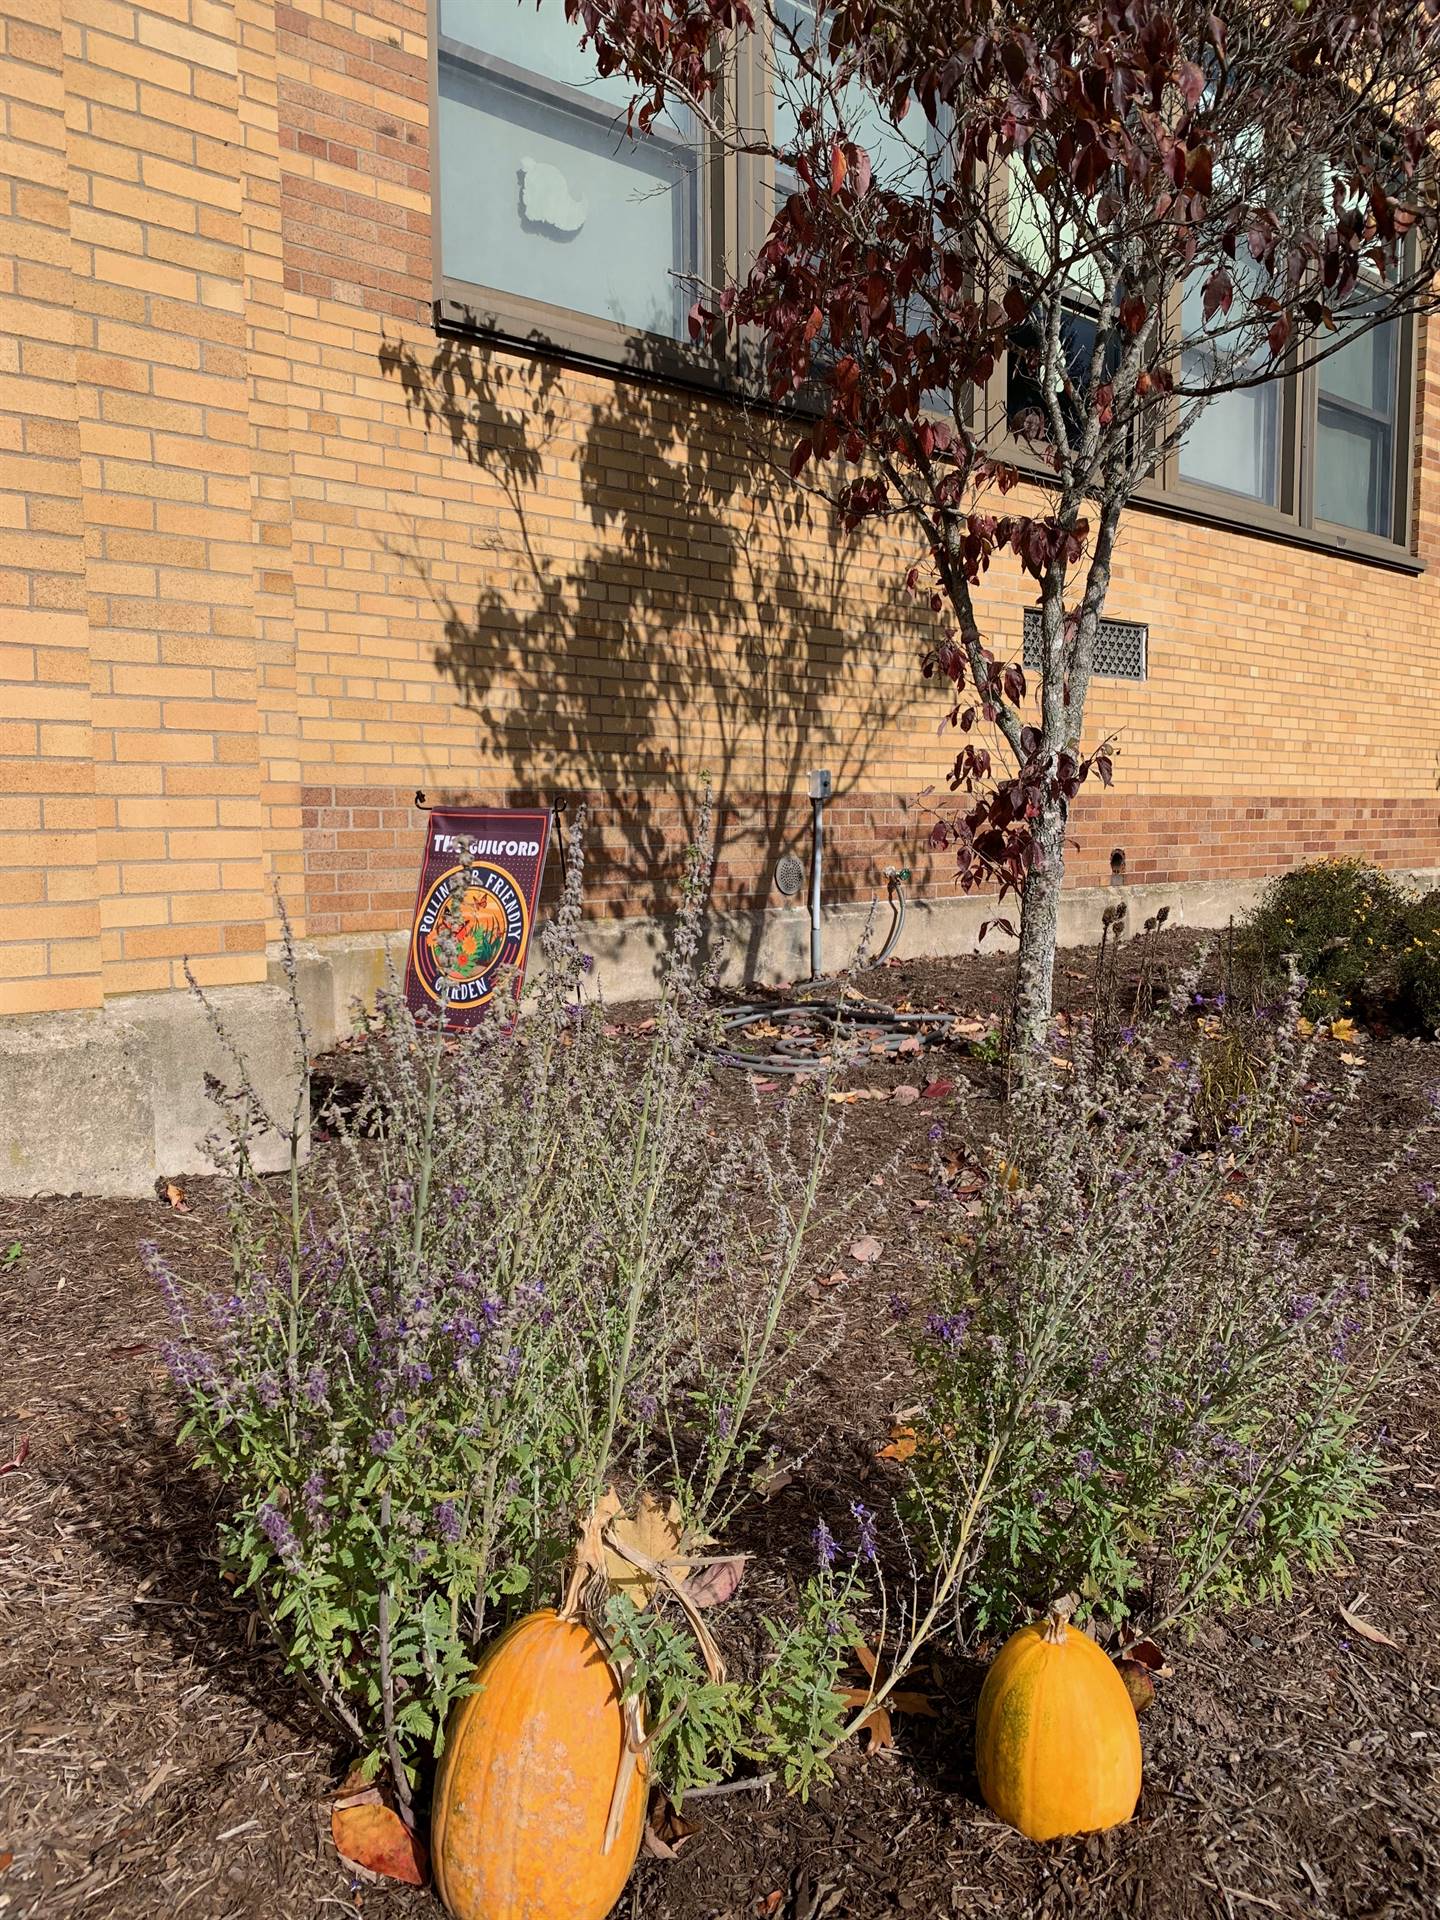 2 pumpkins nestled in a lavender plant outdoors.